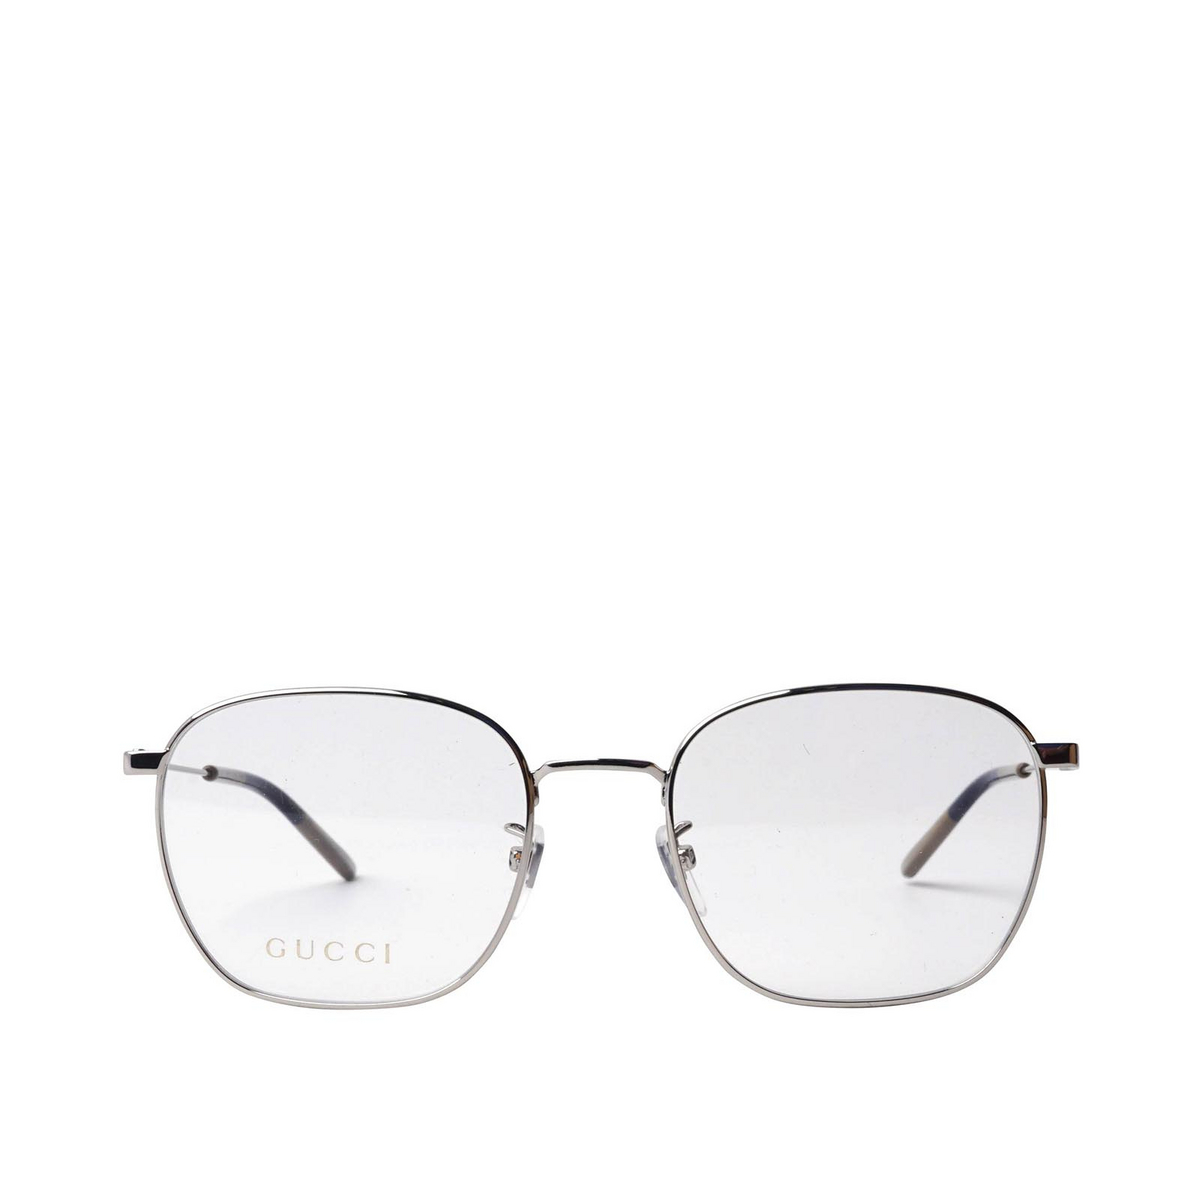 Gucci GG0681O Eyeglasses 003 Silver - front view